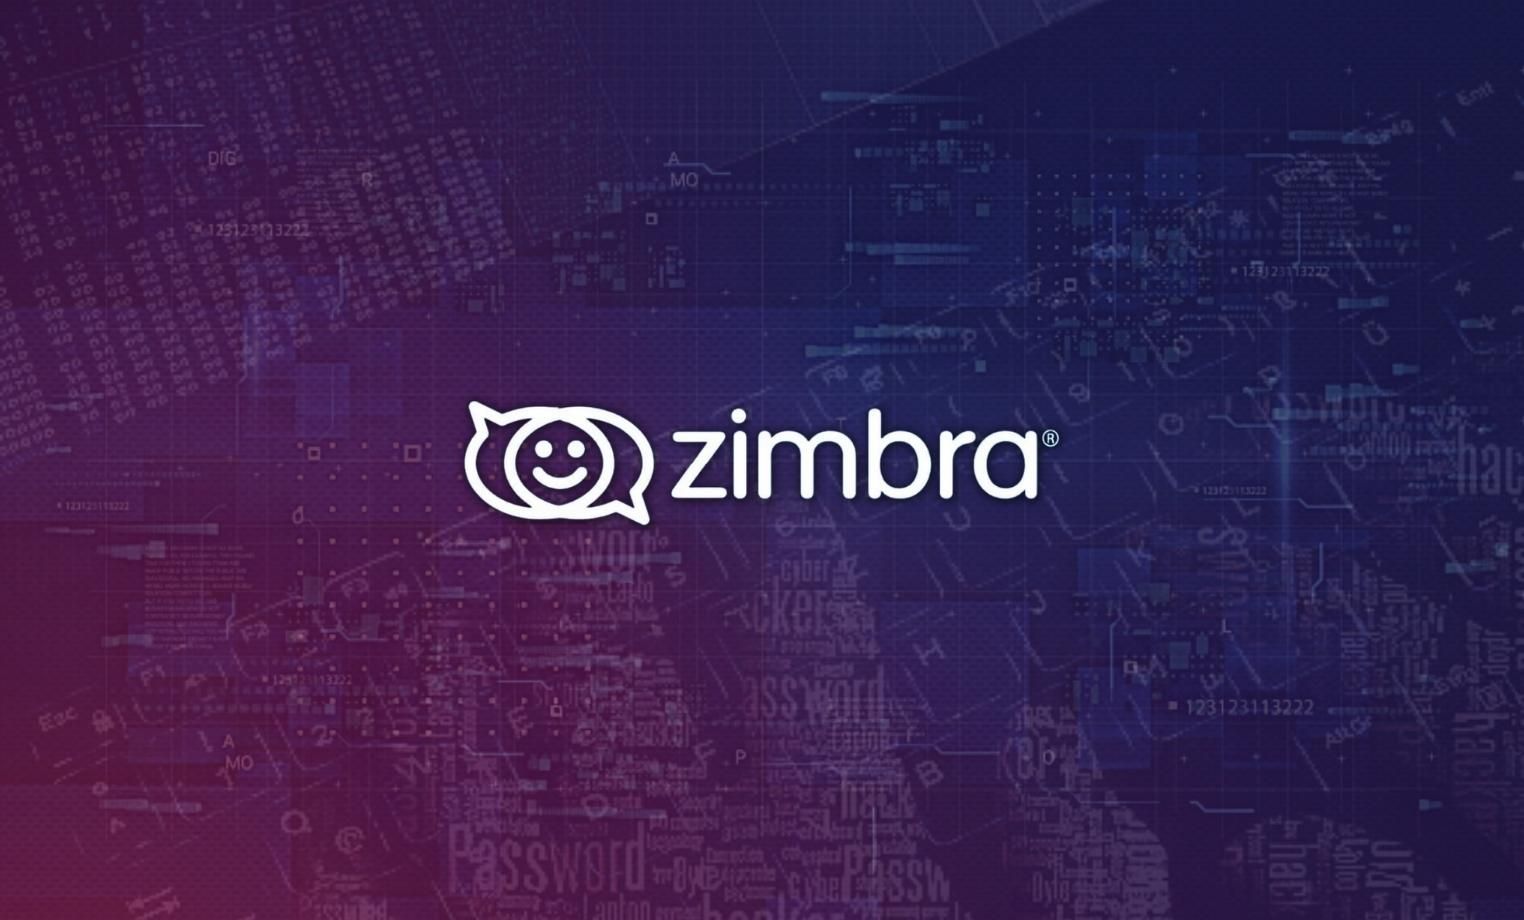 Zimbra puts 200,000 users email at risk following the active